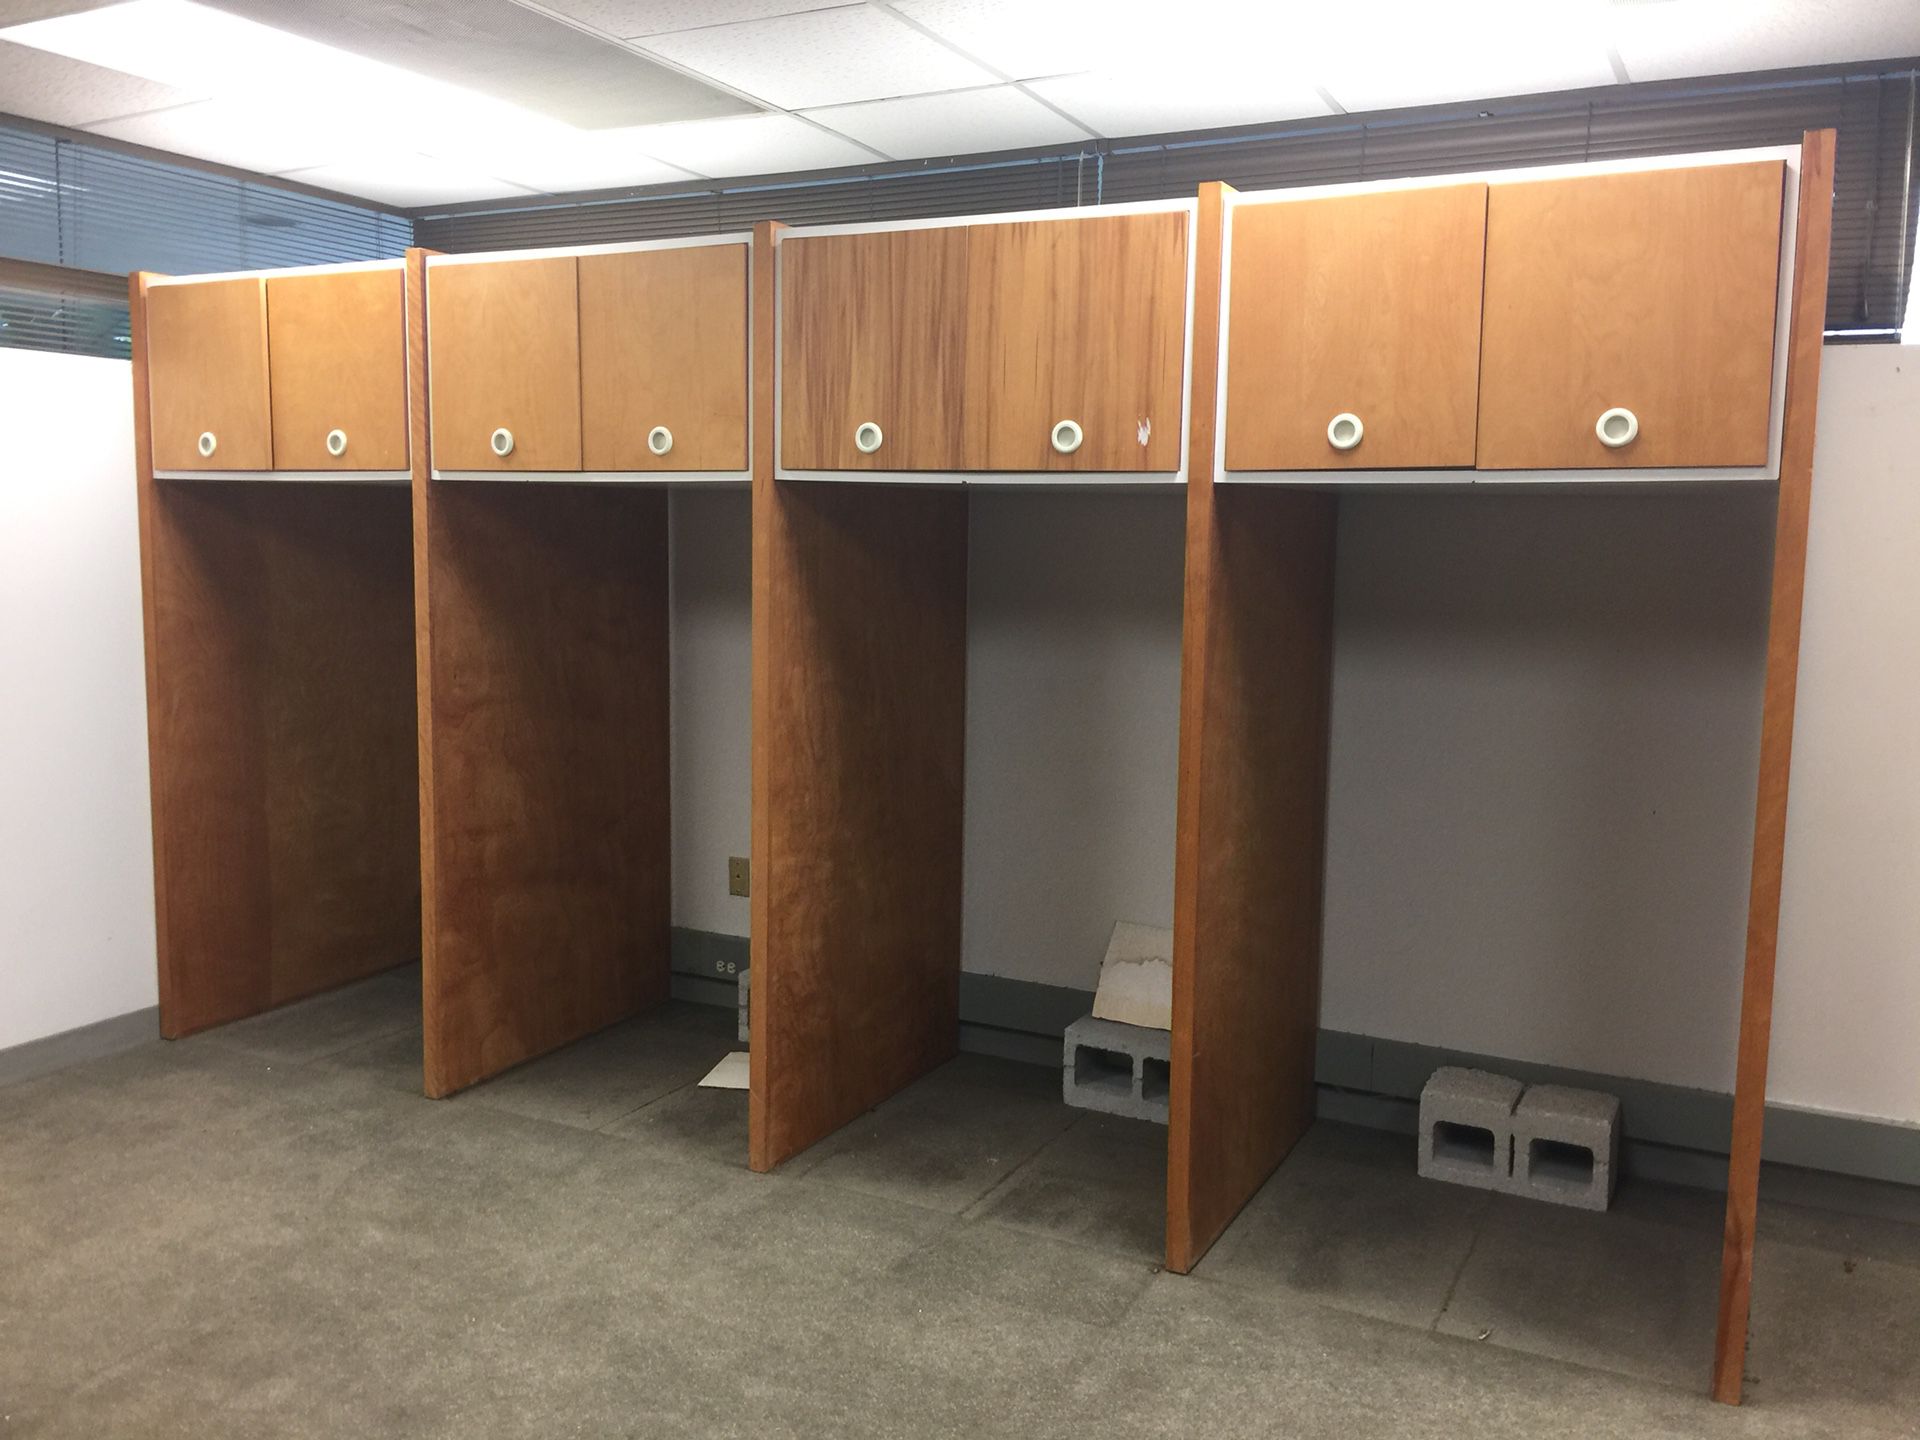 Four file cabinet surrounds. Metal cabinets no longer available. Could add a rod and use to hang clothes. Or use the solid wood ends to make tables.